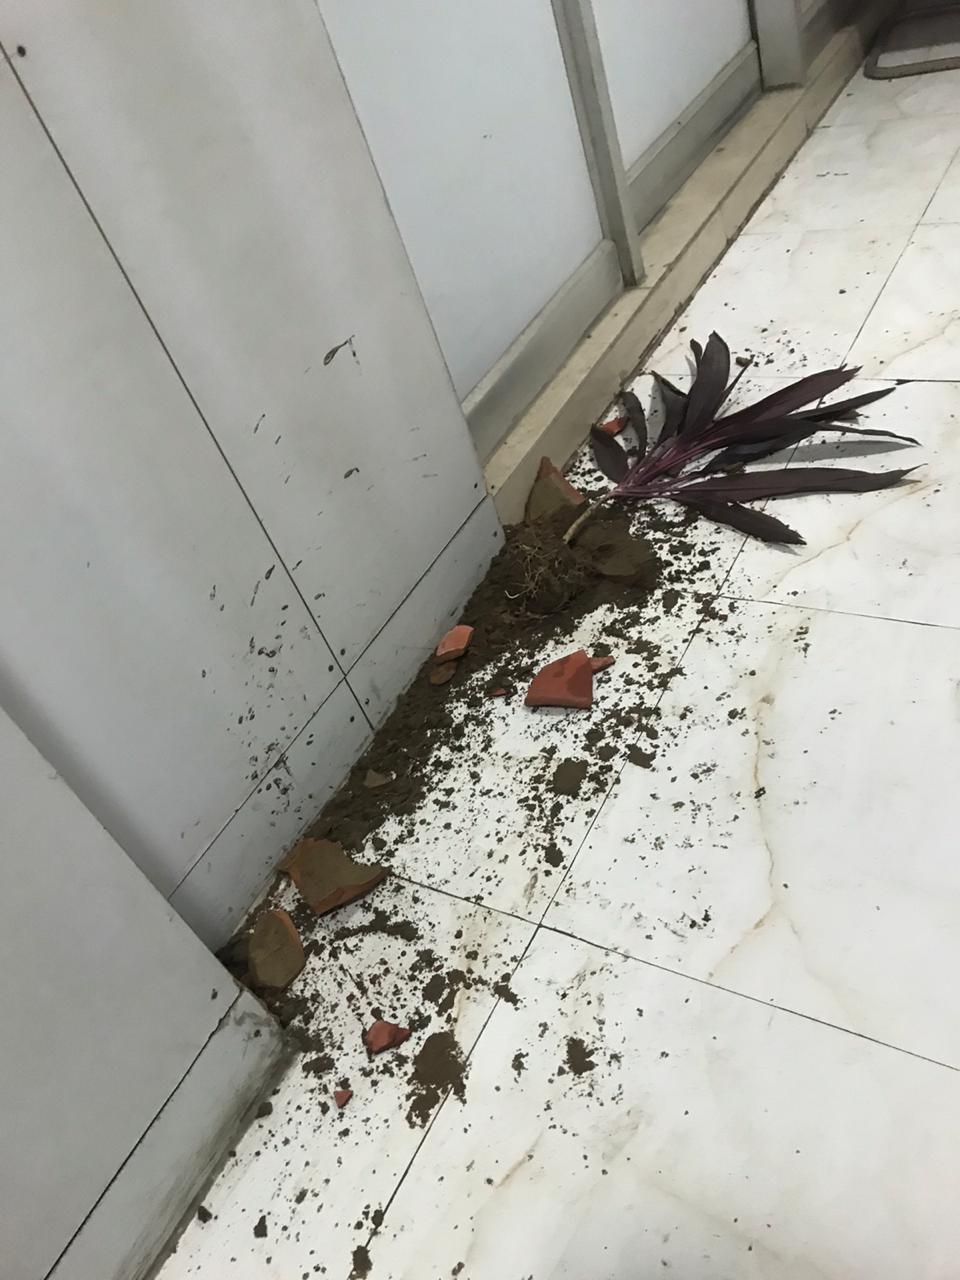 Delhi Jal Board Vice-Chairman Raghav Chaddha's office was allegedly attacked and vandalised by BJP workers for supporting farmers' protest.